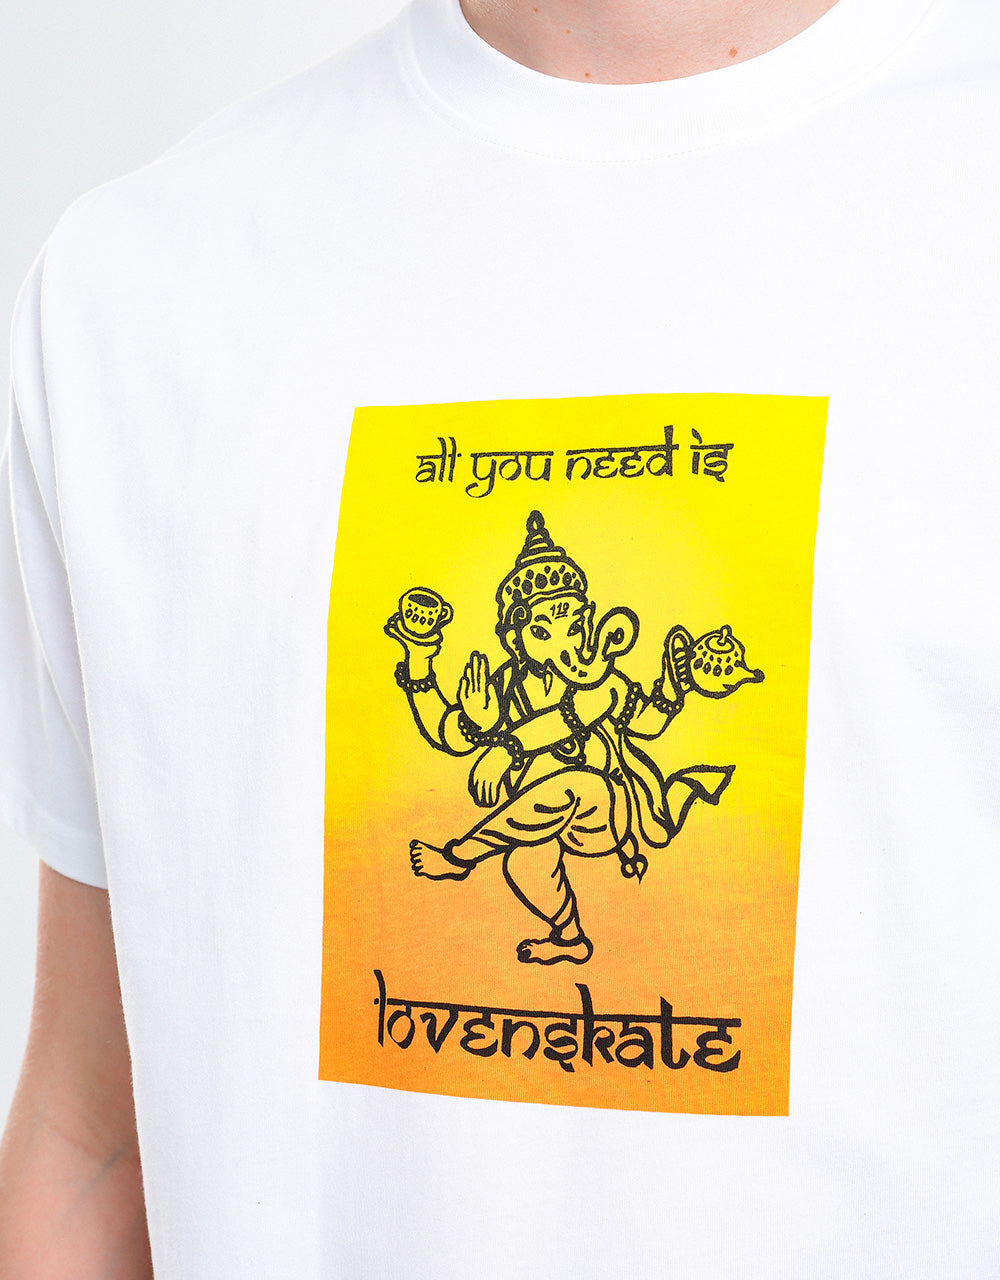 Lovenskate 'All You Need Is....' T-Shirt - White